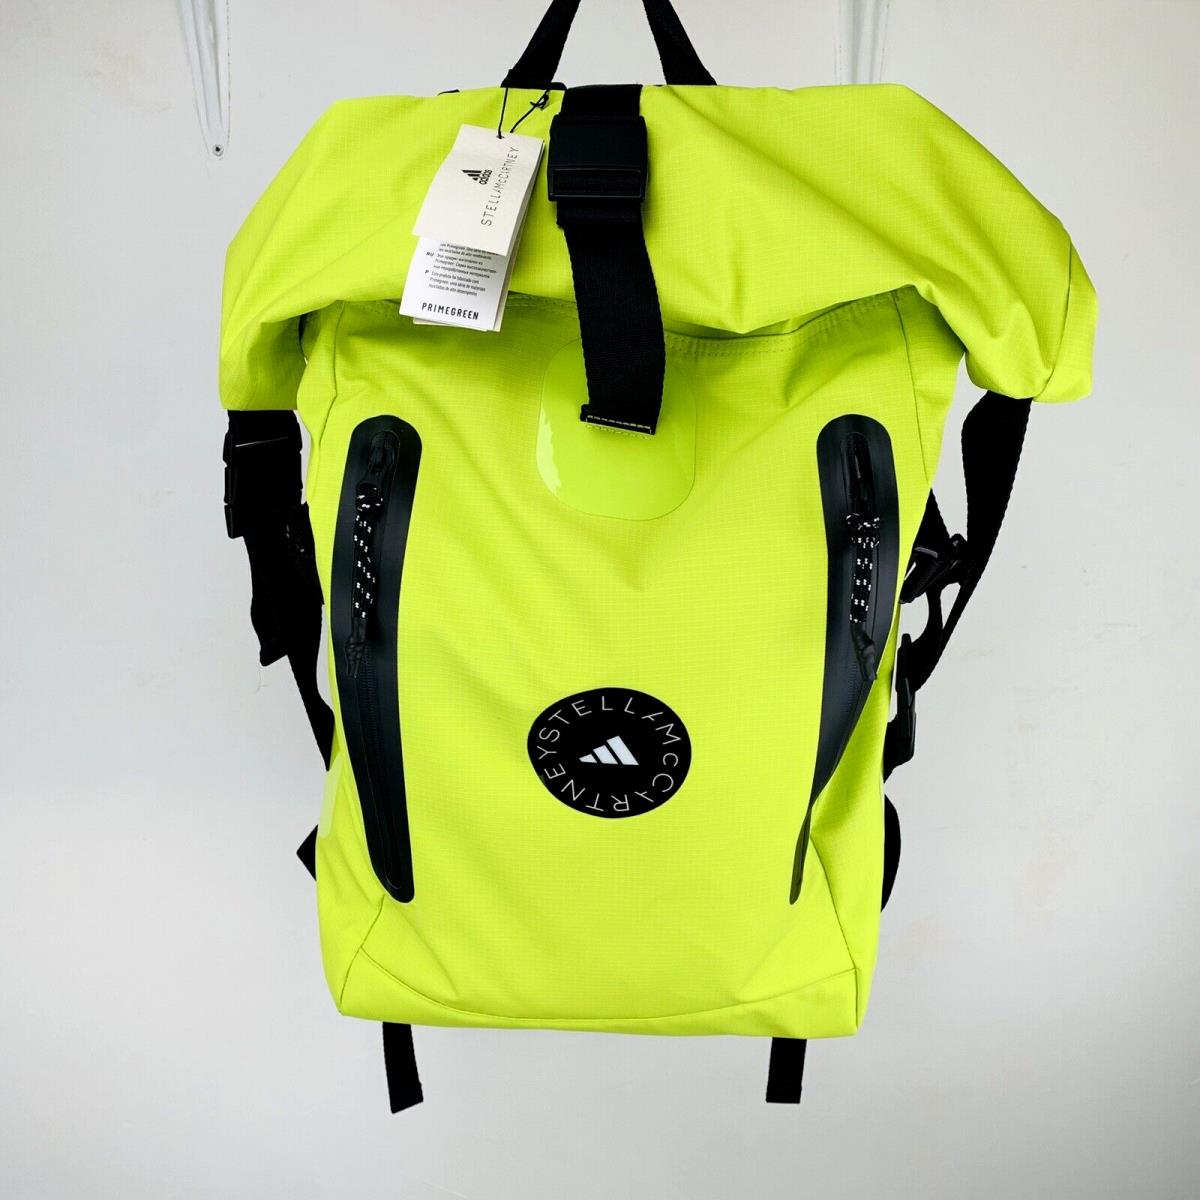 Stella Mccartney Adidas Backpack Yellow HR4342 Roll Top Water Repel